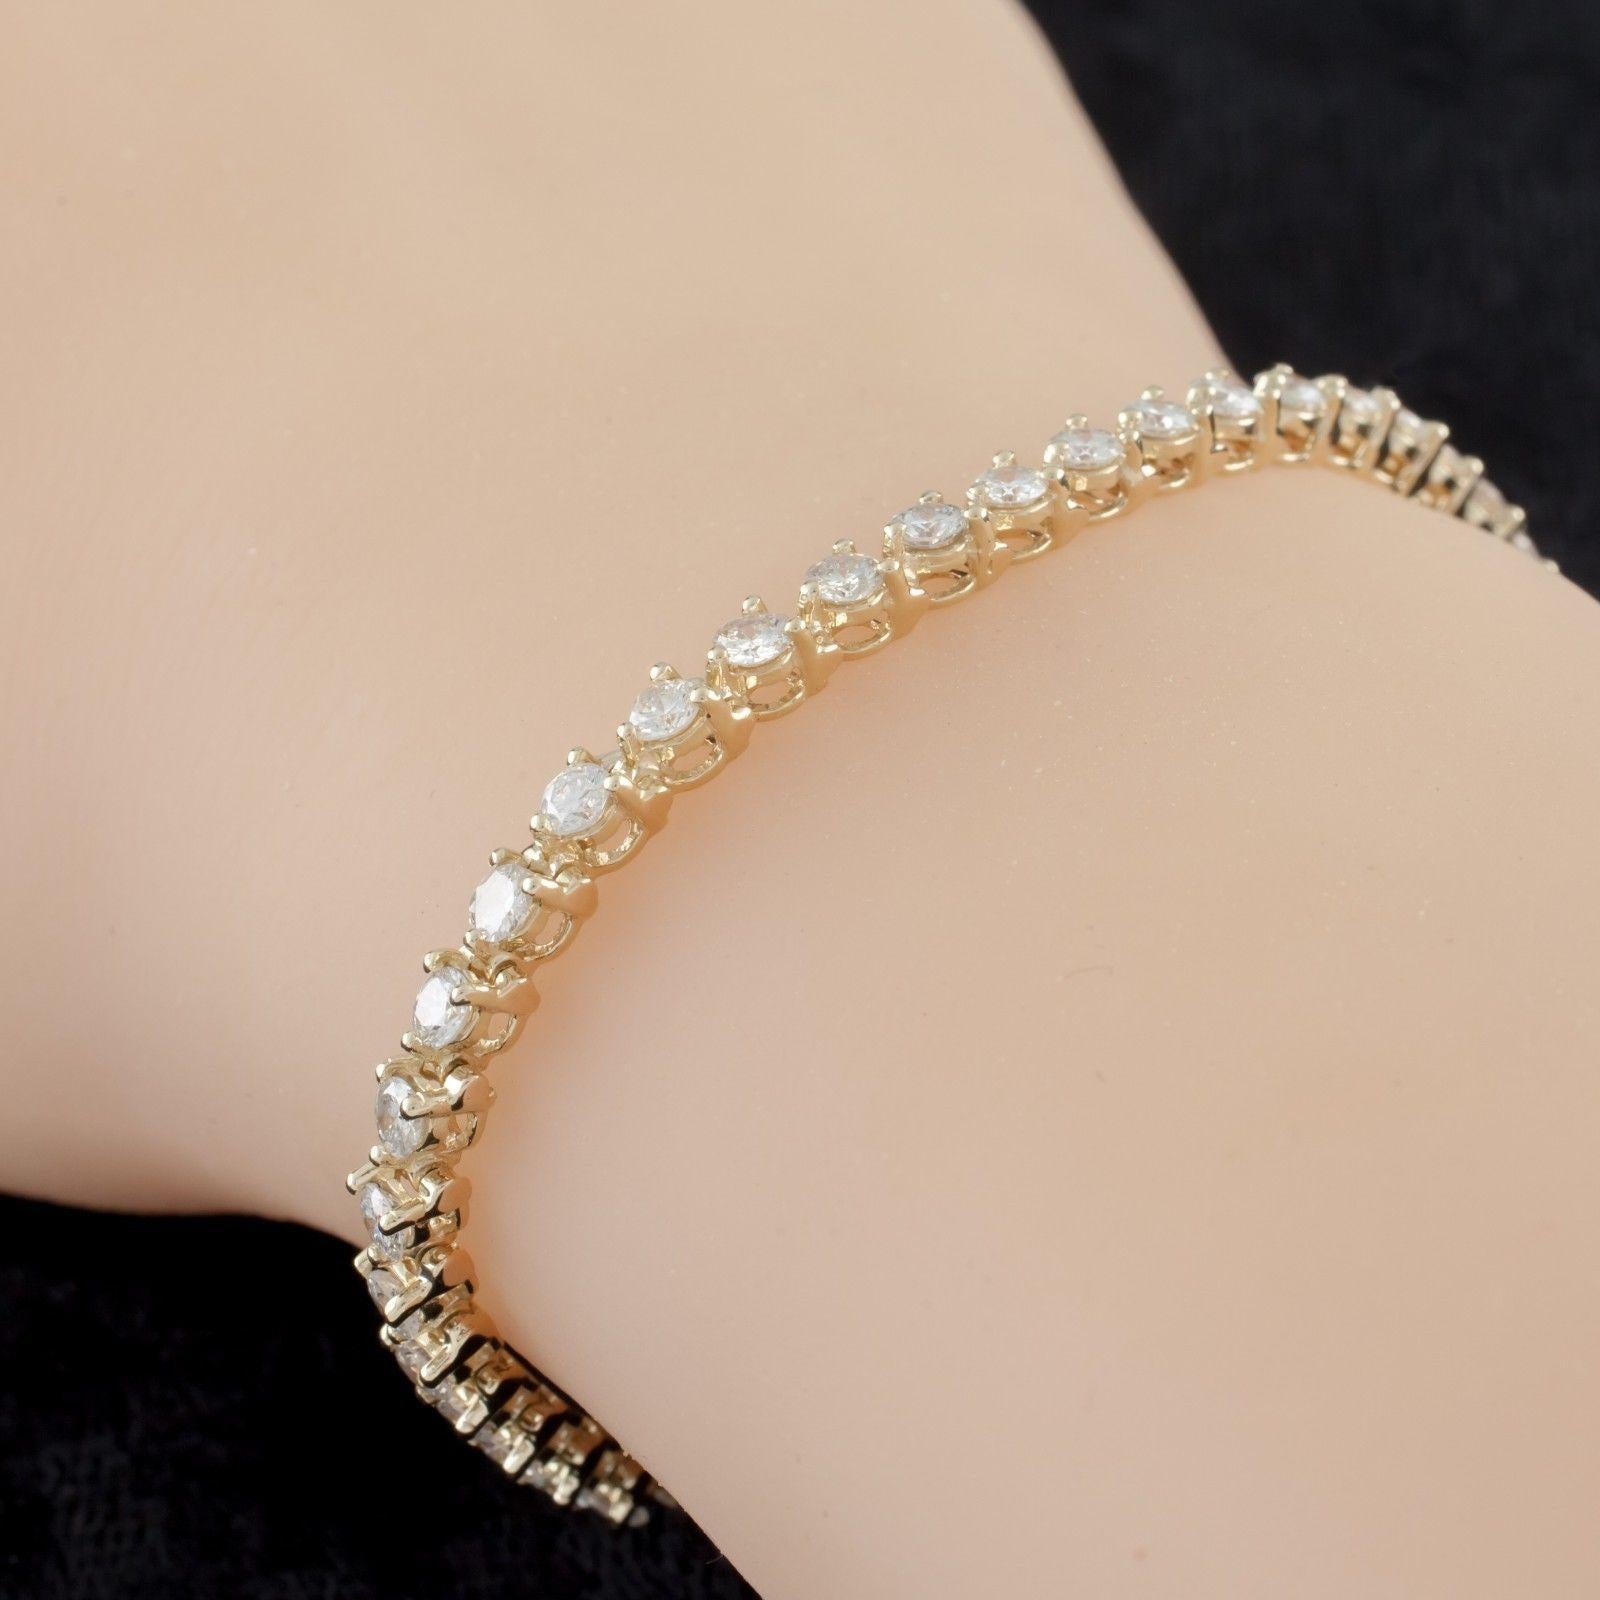 Gorgeous Three-Prong Setting Tennis Bracelet
14k Yellow Gold Setting
Total Diamond Weight = Approximately 5 carats
Total number of diamonds = 43
Average Color = G
Average Clarity = VS - SI
Total Mass = 9.65 grams
Approximately 7